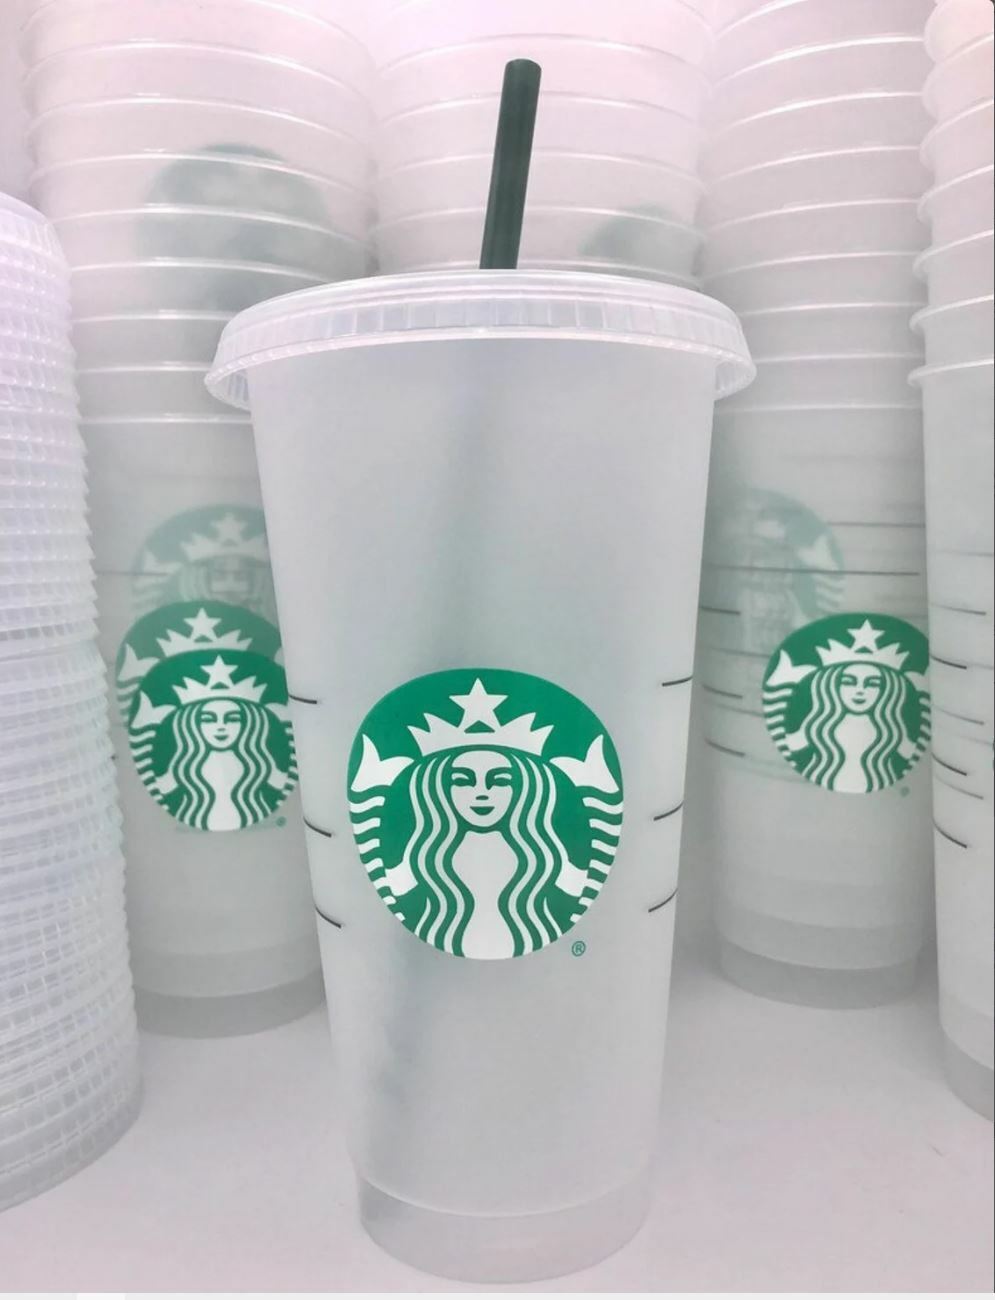 Starbucks Cold & Hot Reusable Cups| Custom Set | Gift 4 her, Cold Cups, Hot Cups